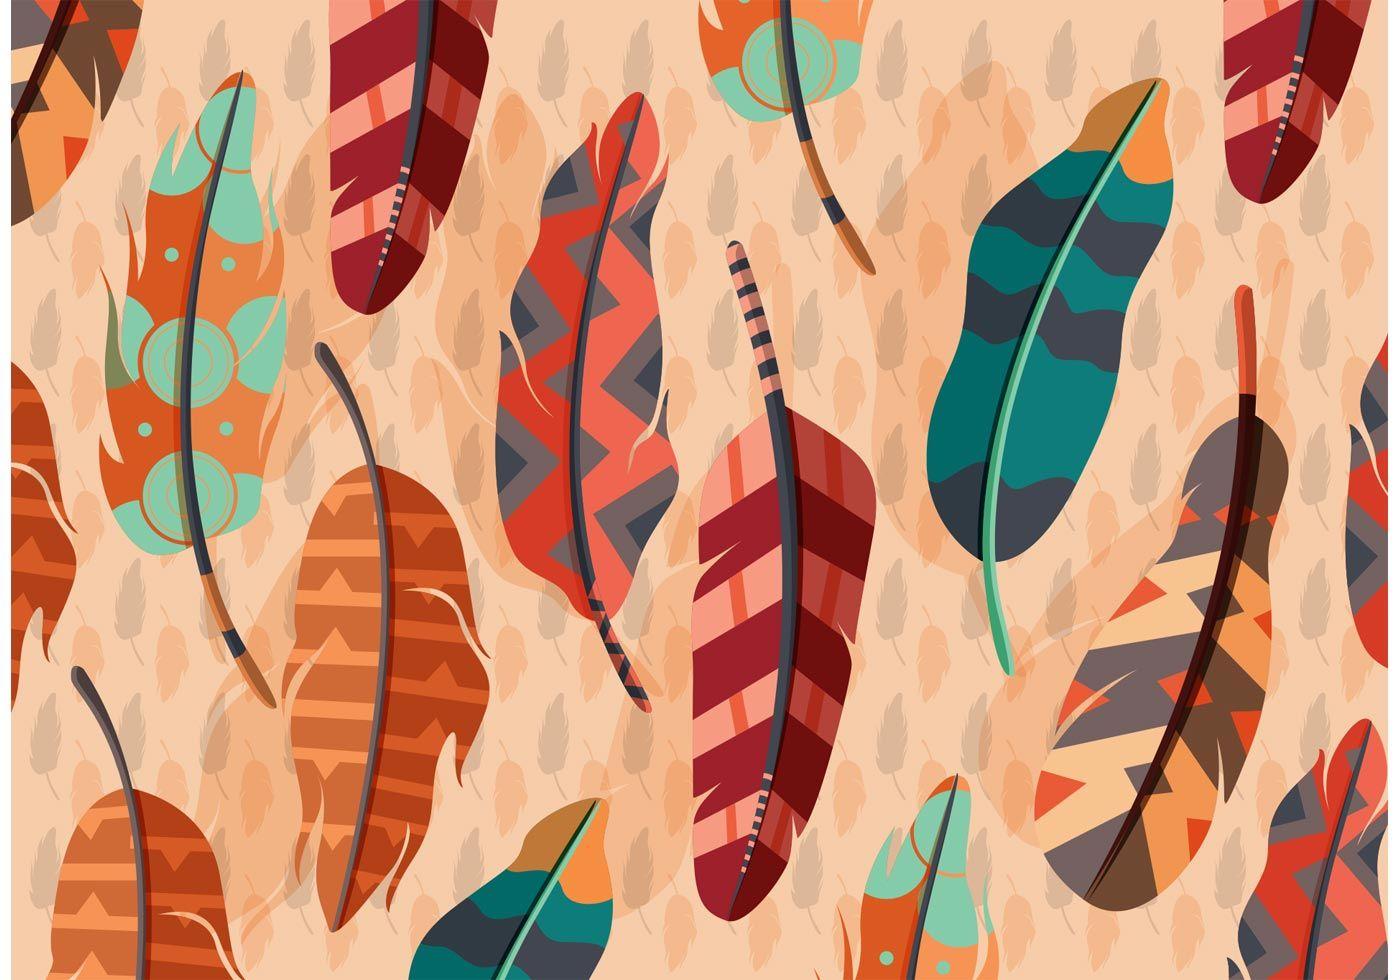 Boho Feather Free Vector Art - (1203 Free Downloads)